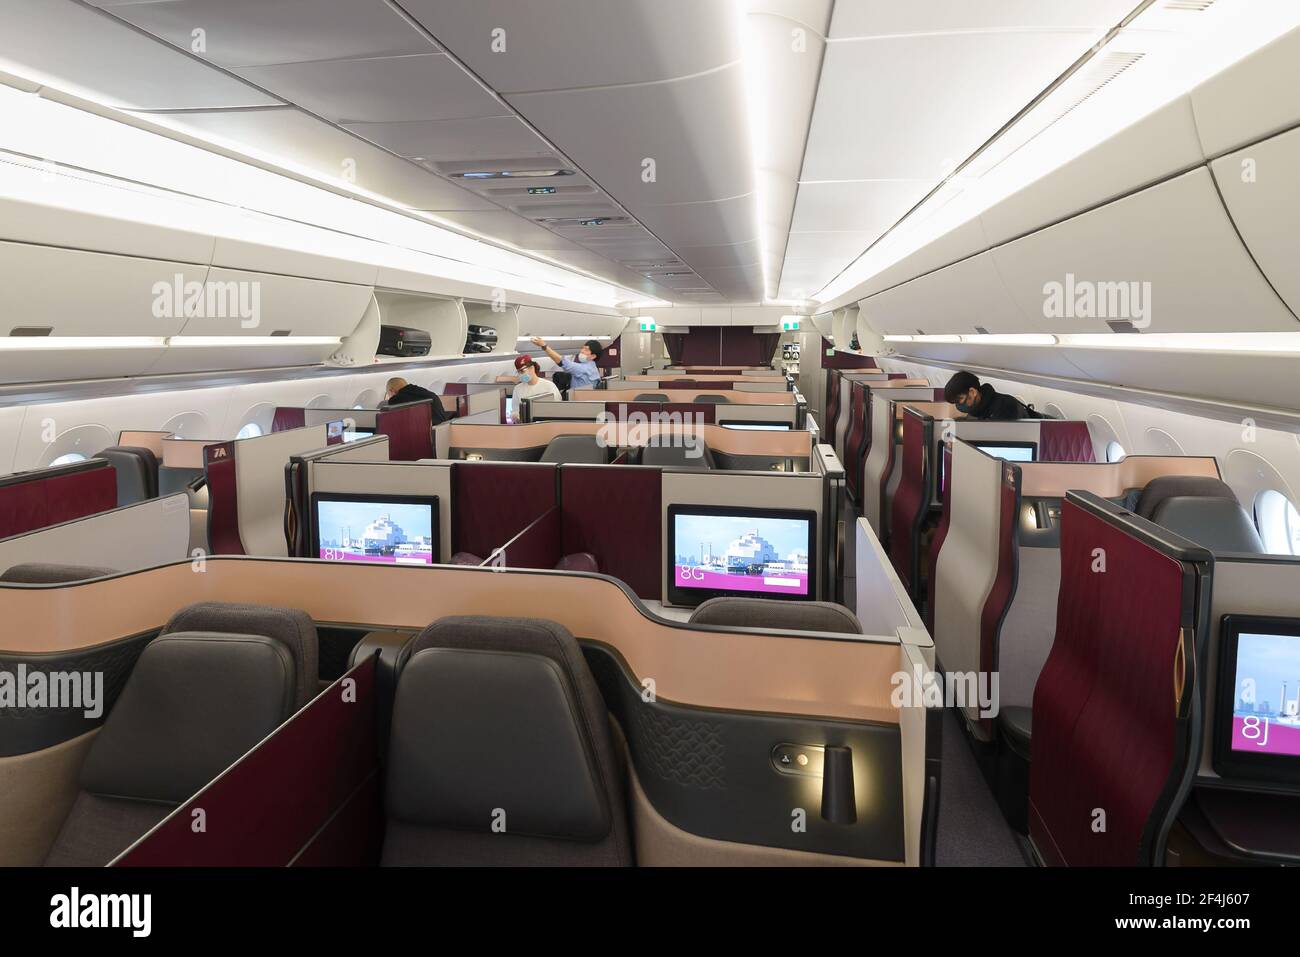 Qatar Airways QSuites cabin on Airbus A350. QSuite is a premium business class seat with doors introduced by Qatar Airways. Boarding at Doha, Qatar. Stock Photo